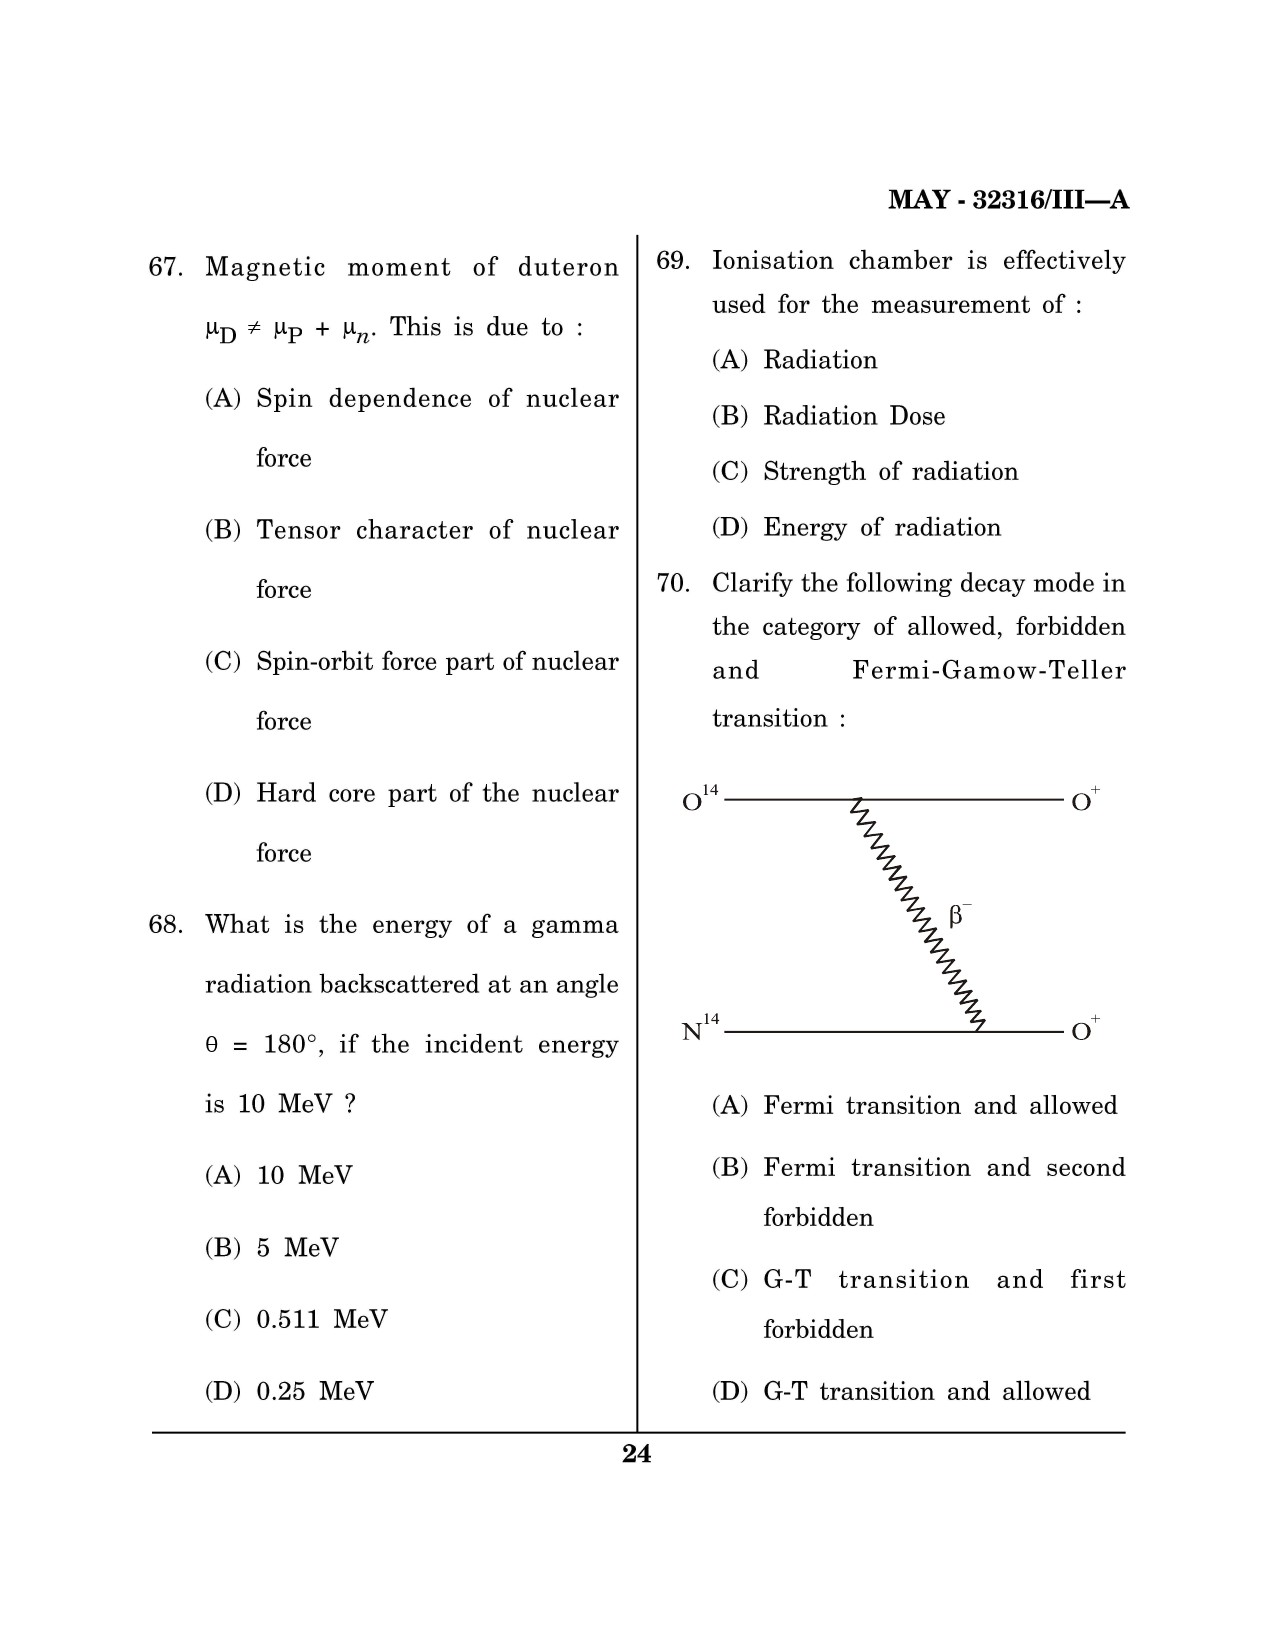 Maharashtra SET Physical Science Question Paper III May 2016 23